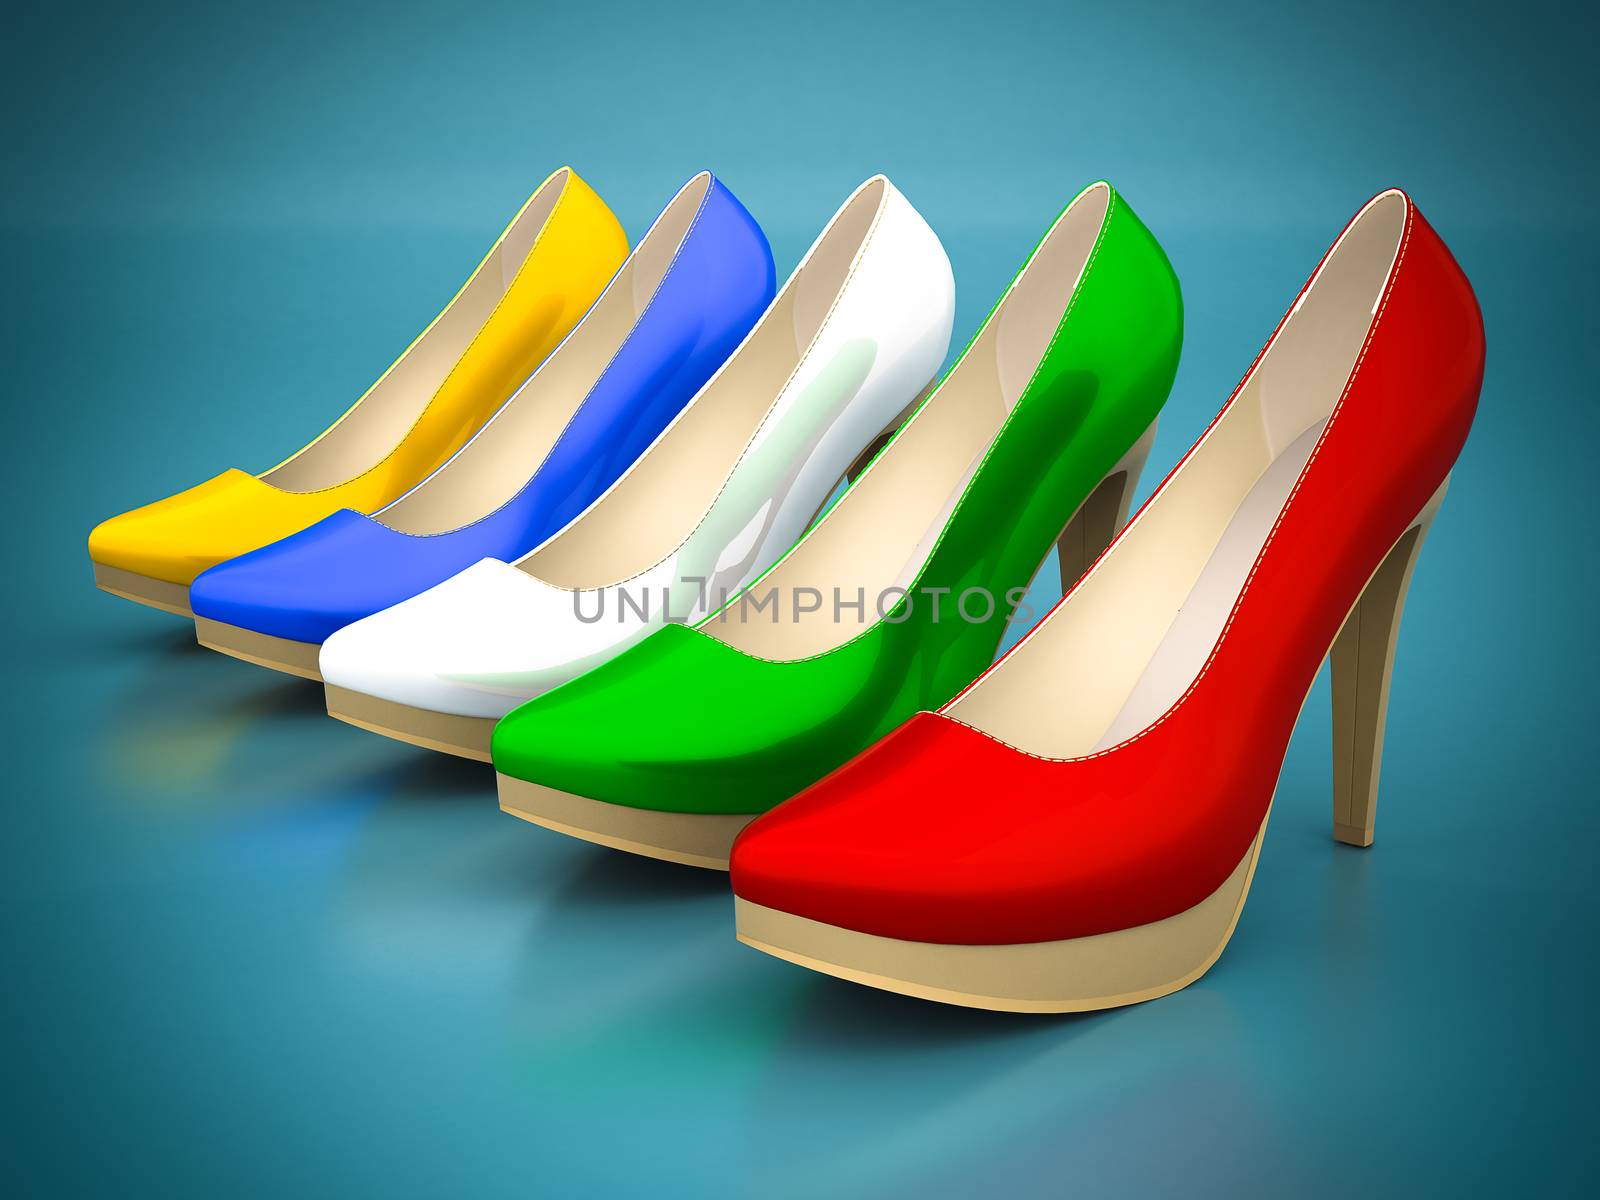 High heel shoes by mrgarry